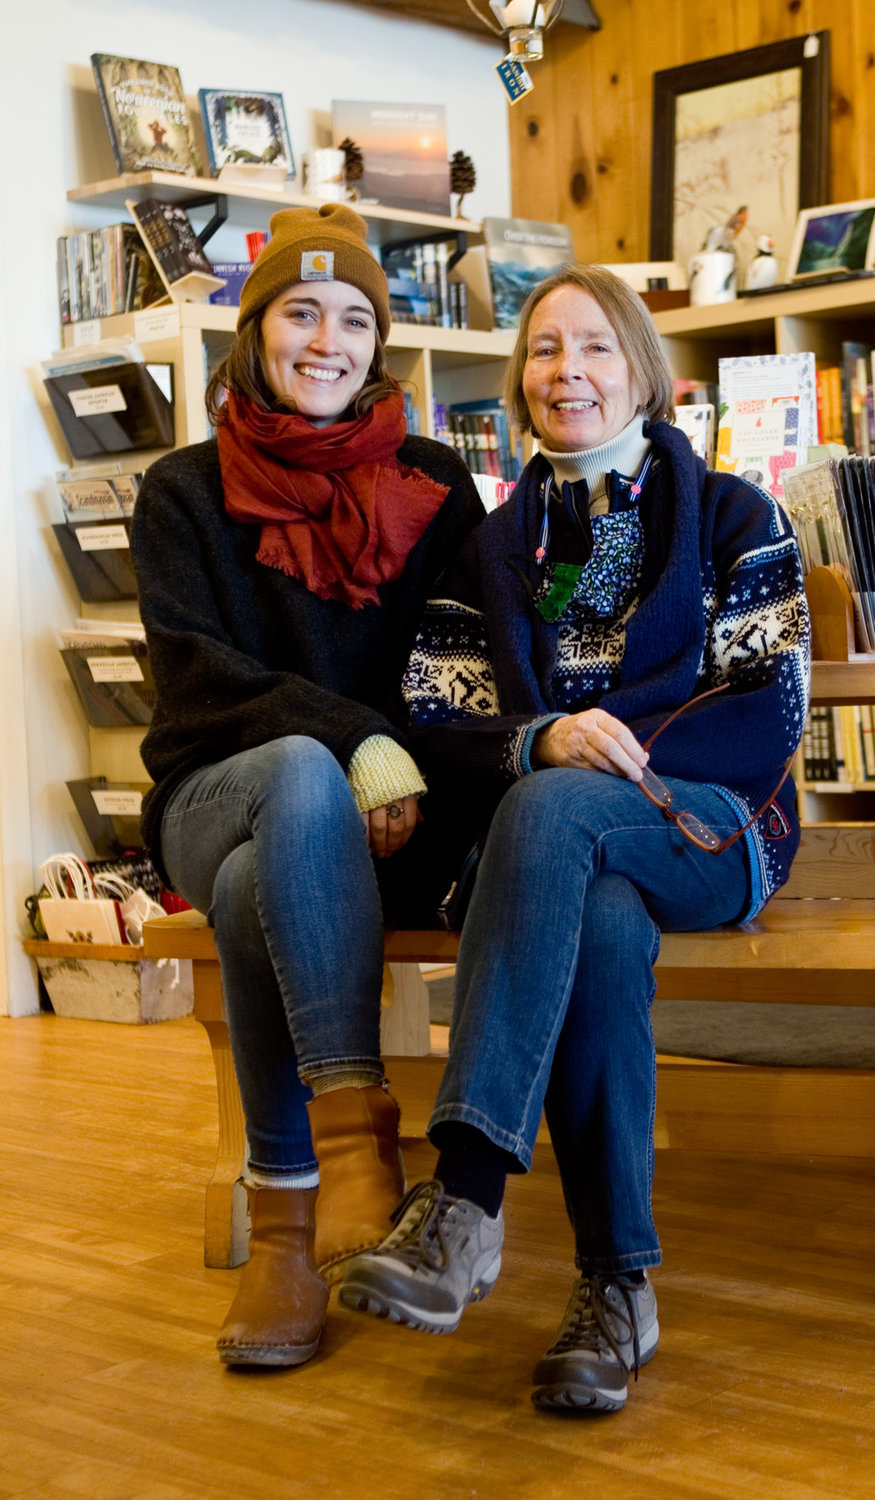 Anna Bloomstrand (left) and Julie Ingebretsen (right), mother and daughter duo, run Ingebretsen’s Scandinavian Gifts and Foods. The shop sells a variety of food items, including lingonberry preserves, as well as gifts which range from earthy-friendly candles, cellulose dish clothes and Scandinvian-themed art. (Photos by Margie O’Loughlin)